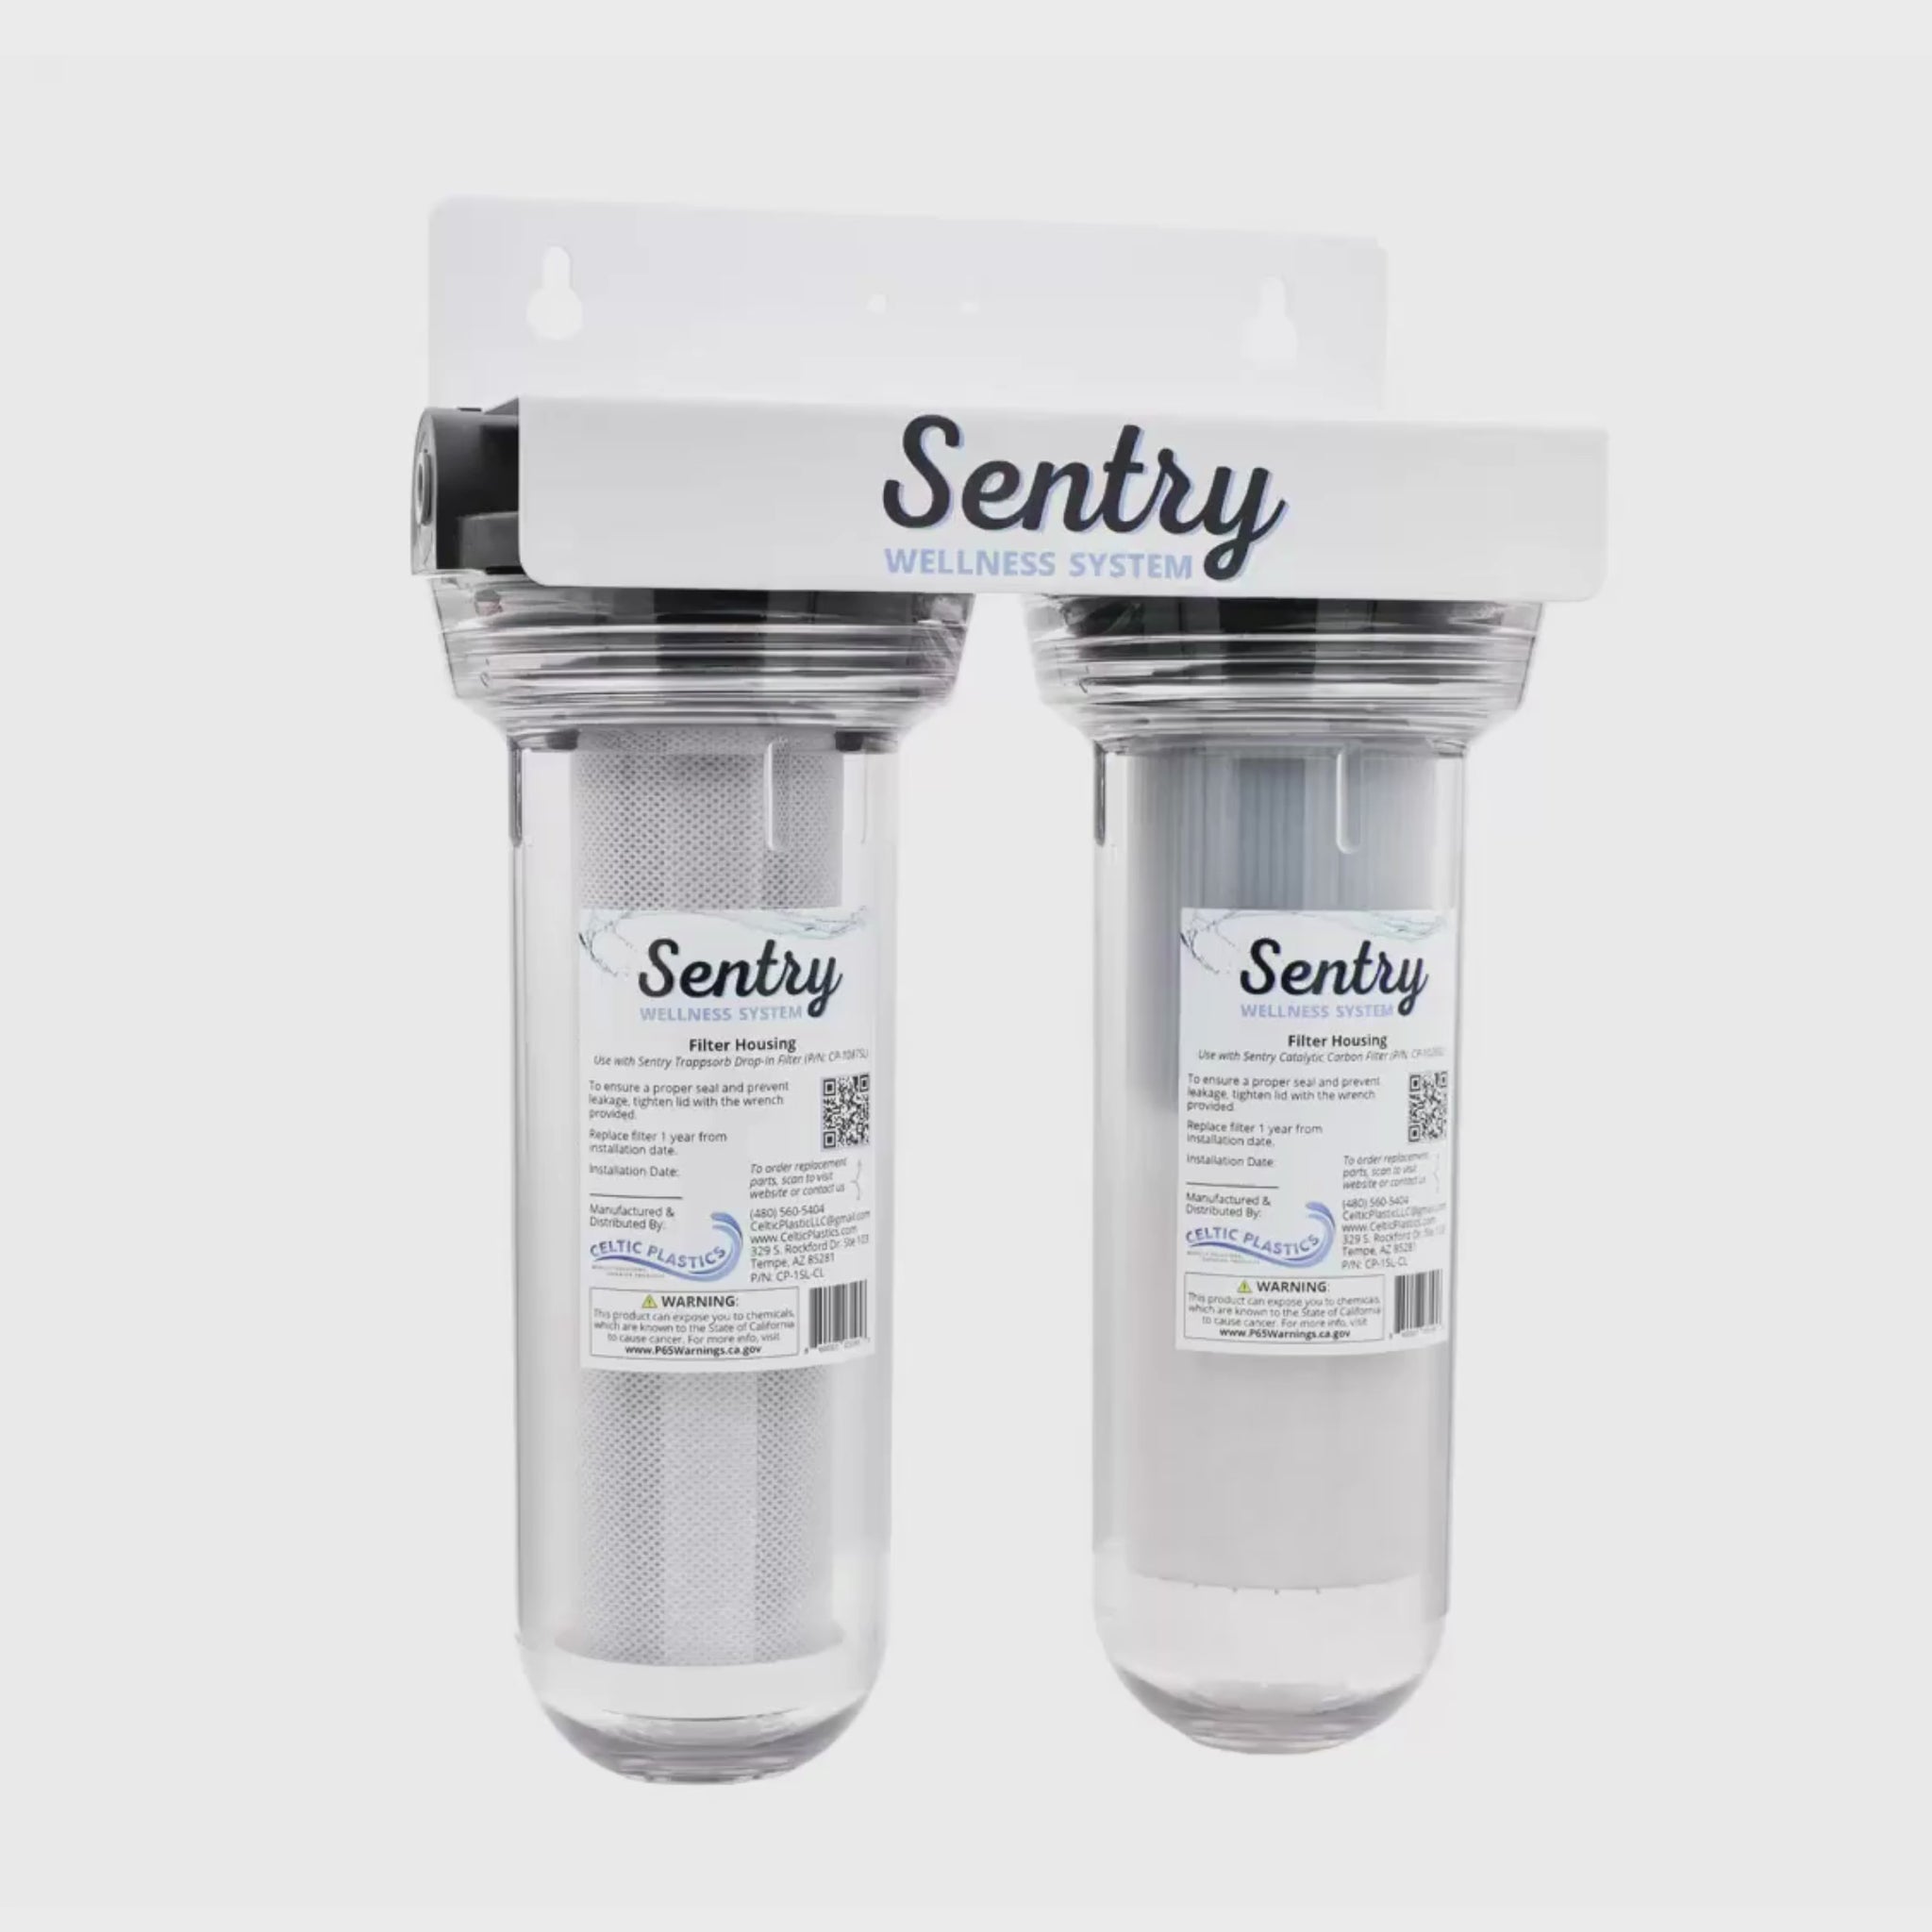 Sentry Wellness System - Water Filters